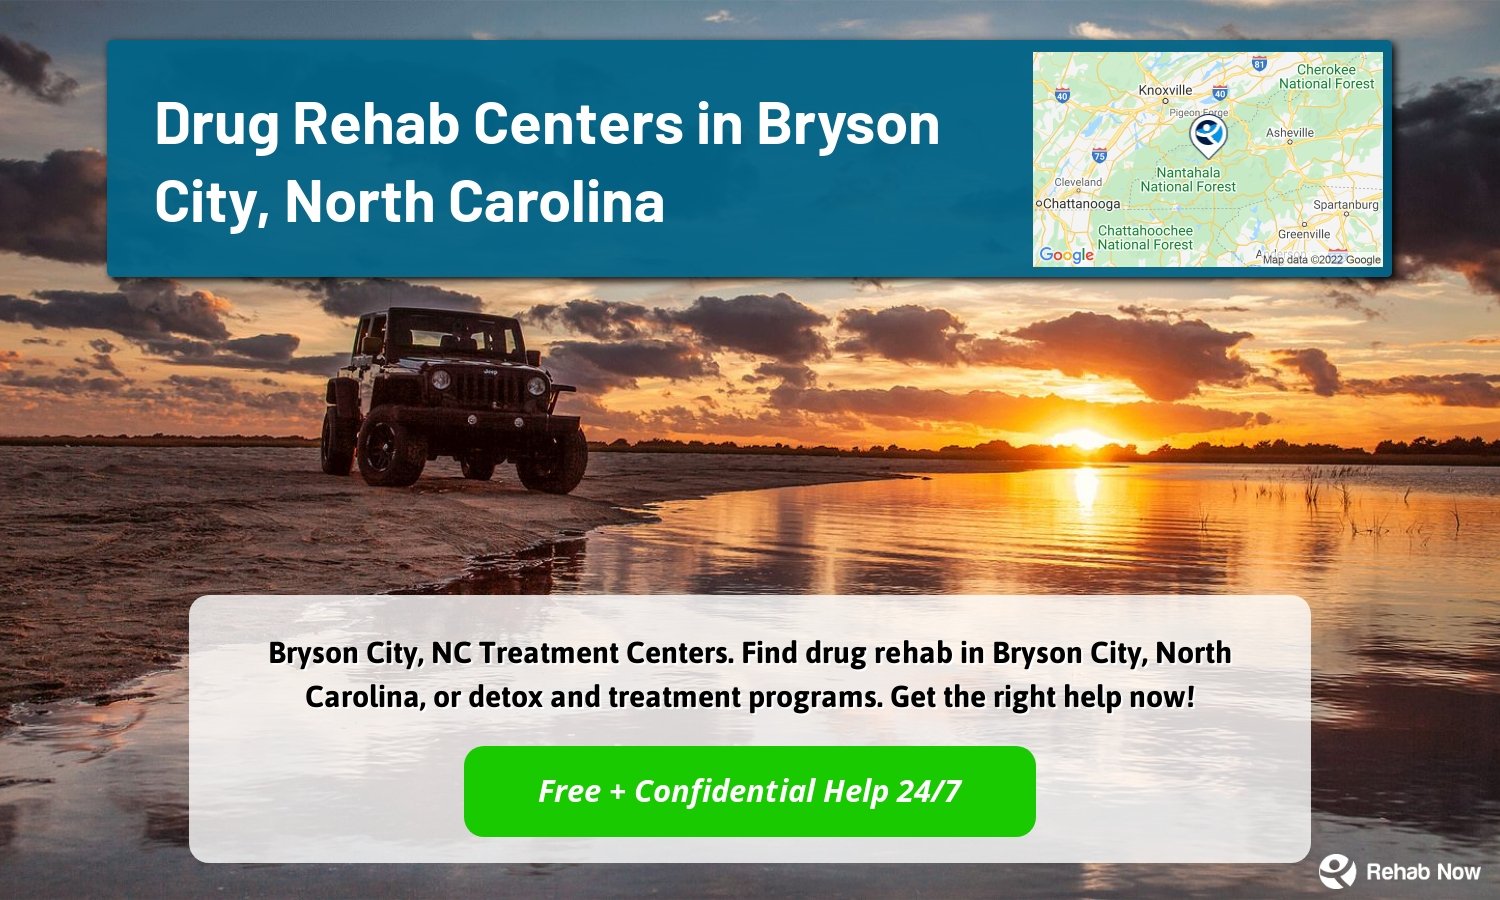 Bryson City, NC Treatment Centers. Find drug rehab in Bryson City, North Carolina, or detox and treatment programs. Get the right help now!